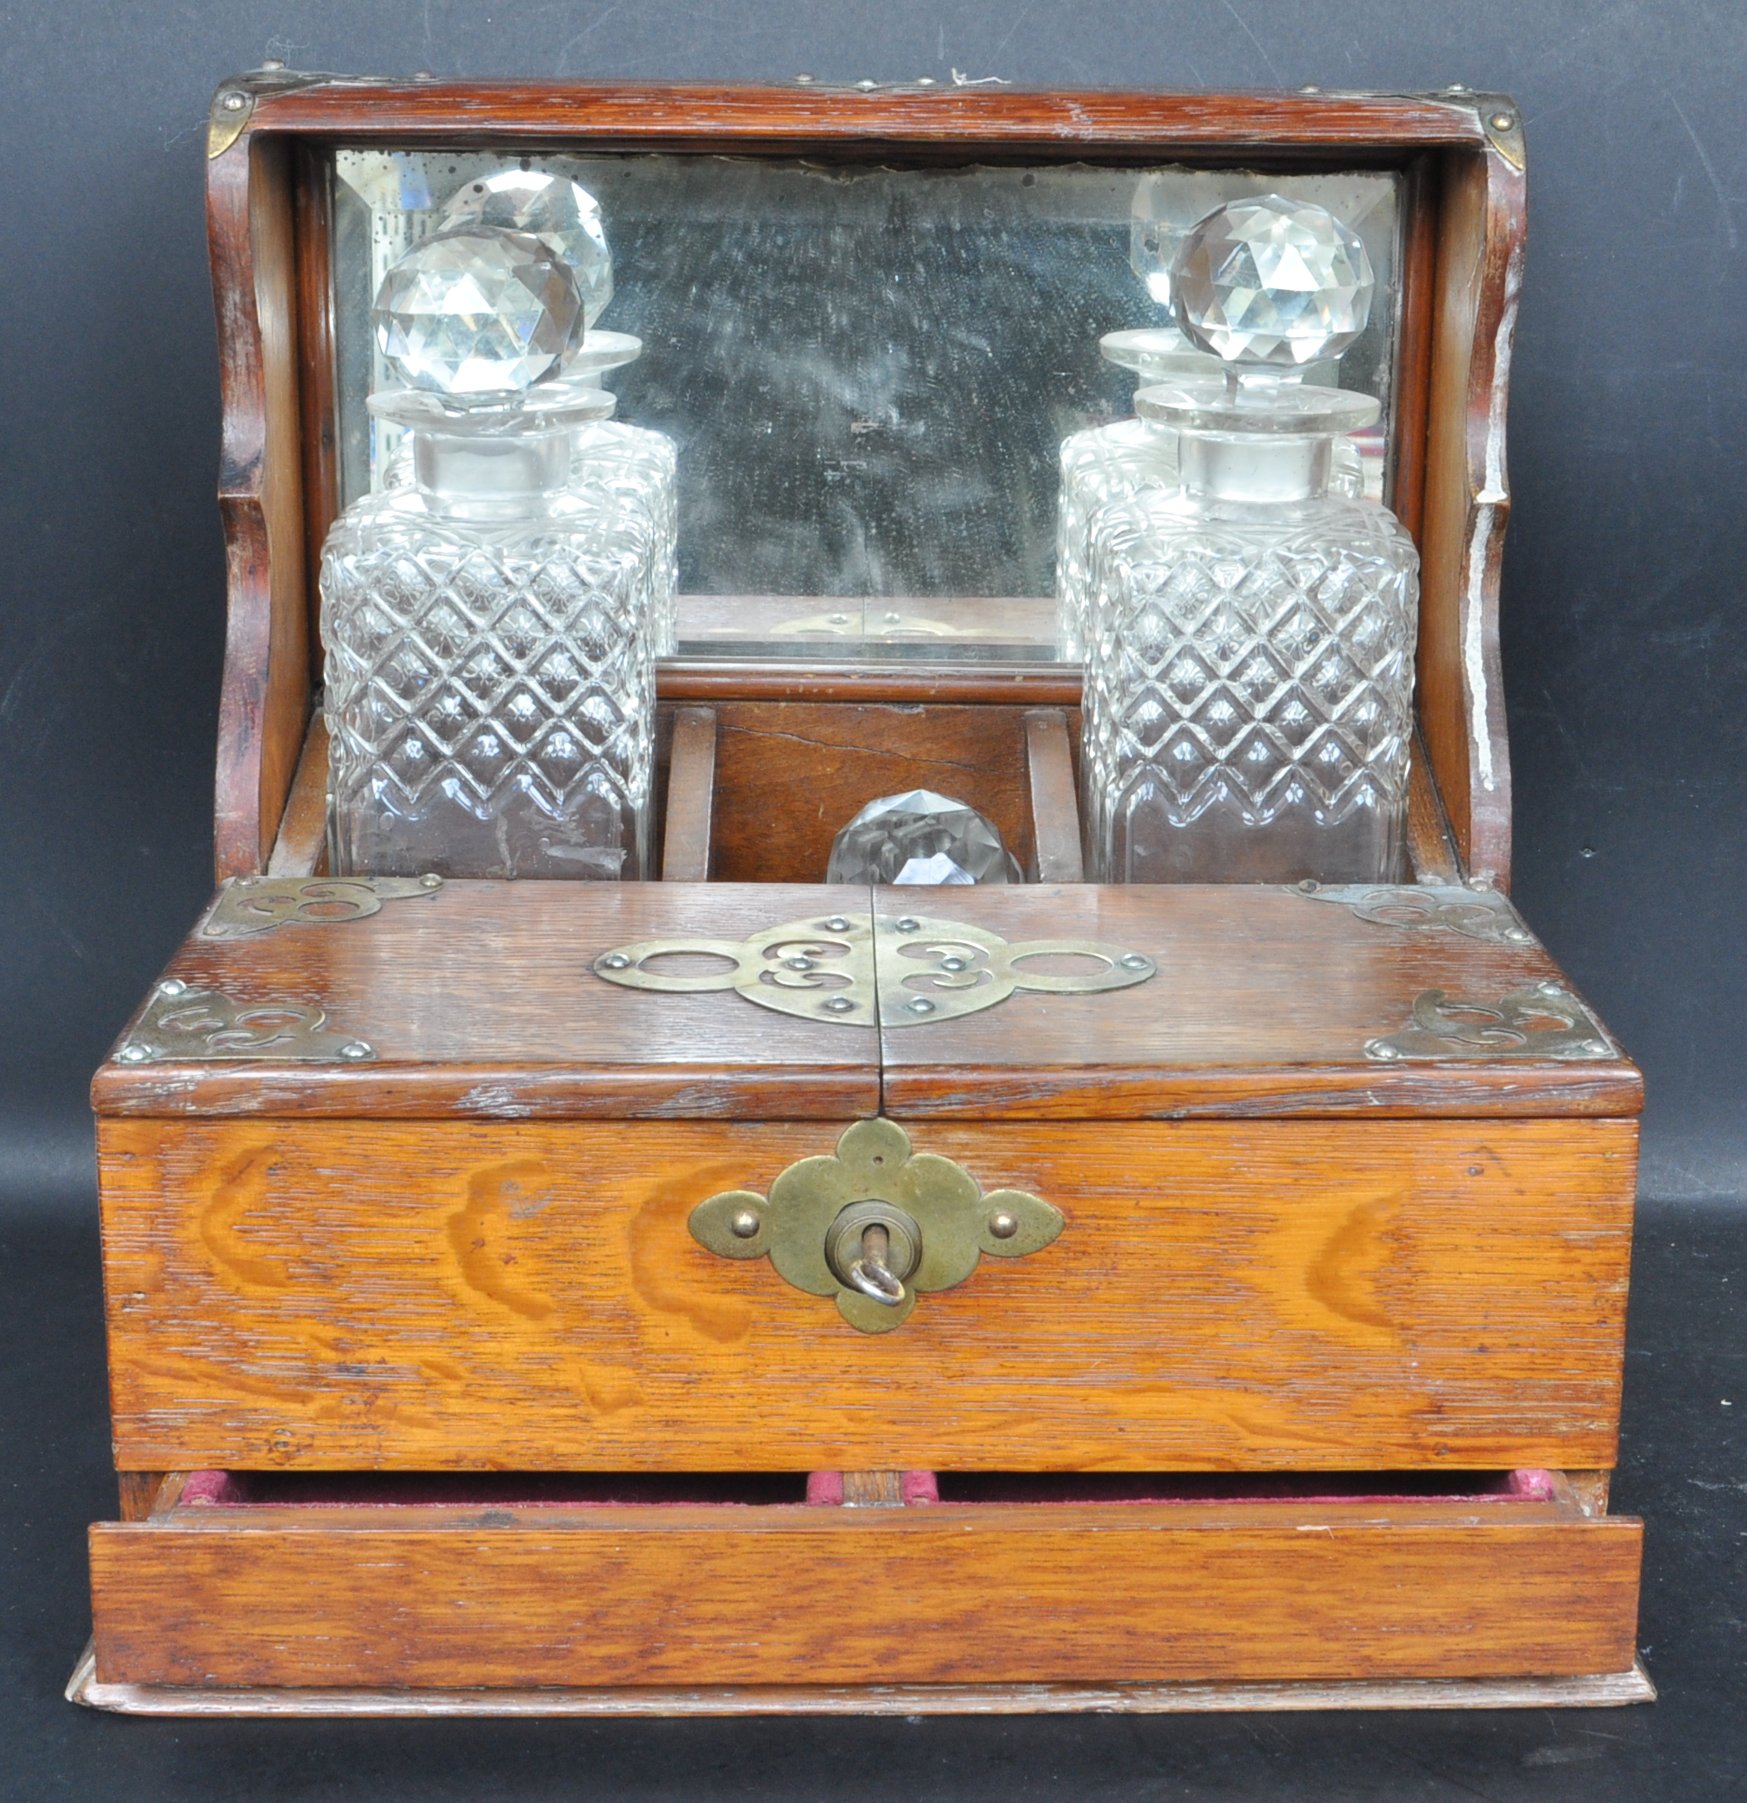 EARLY 20TH CENTURY OAK TANTALUS WITH GLASS DECANTERS